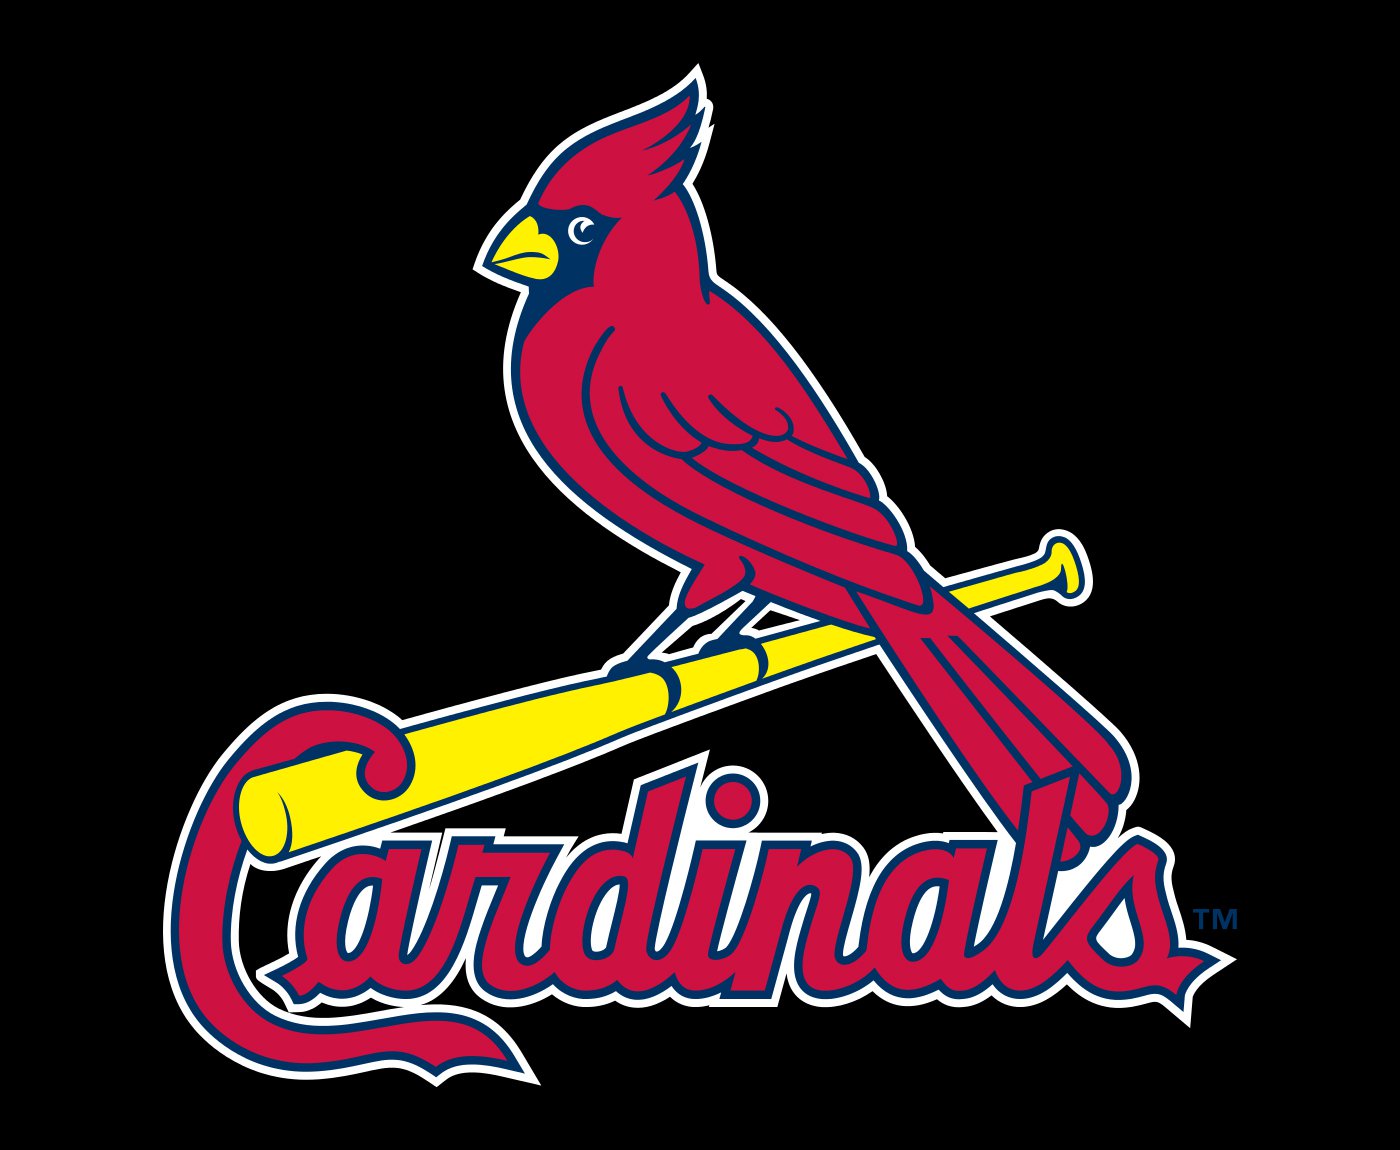 St. Louis Cardinals Logo, St. Louis Cardinals Symbol, Meaning, History and Evolution